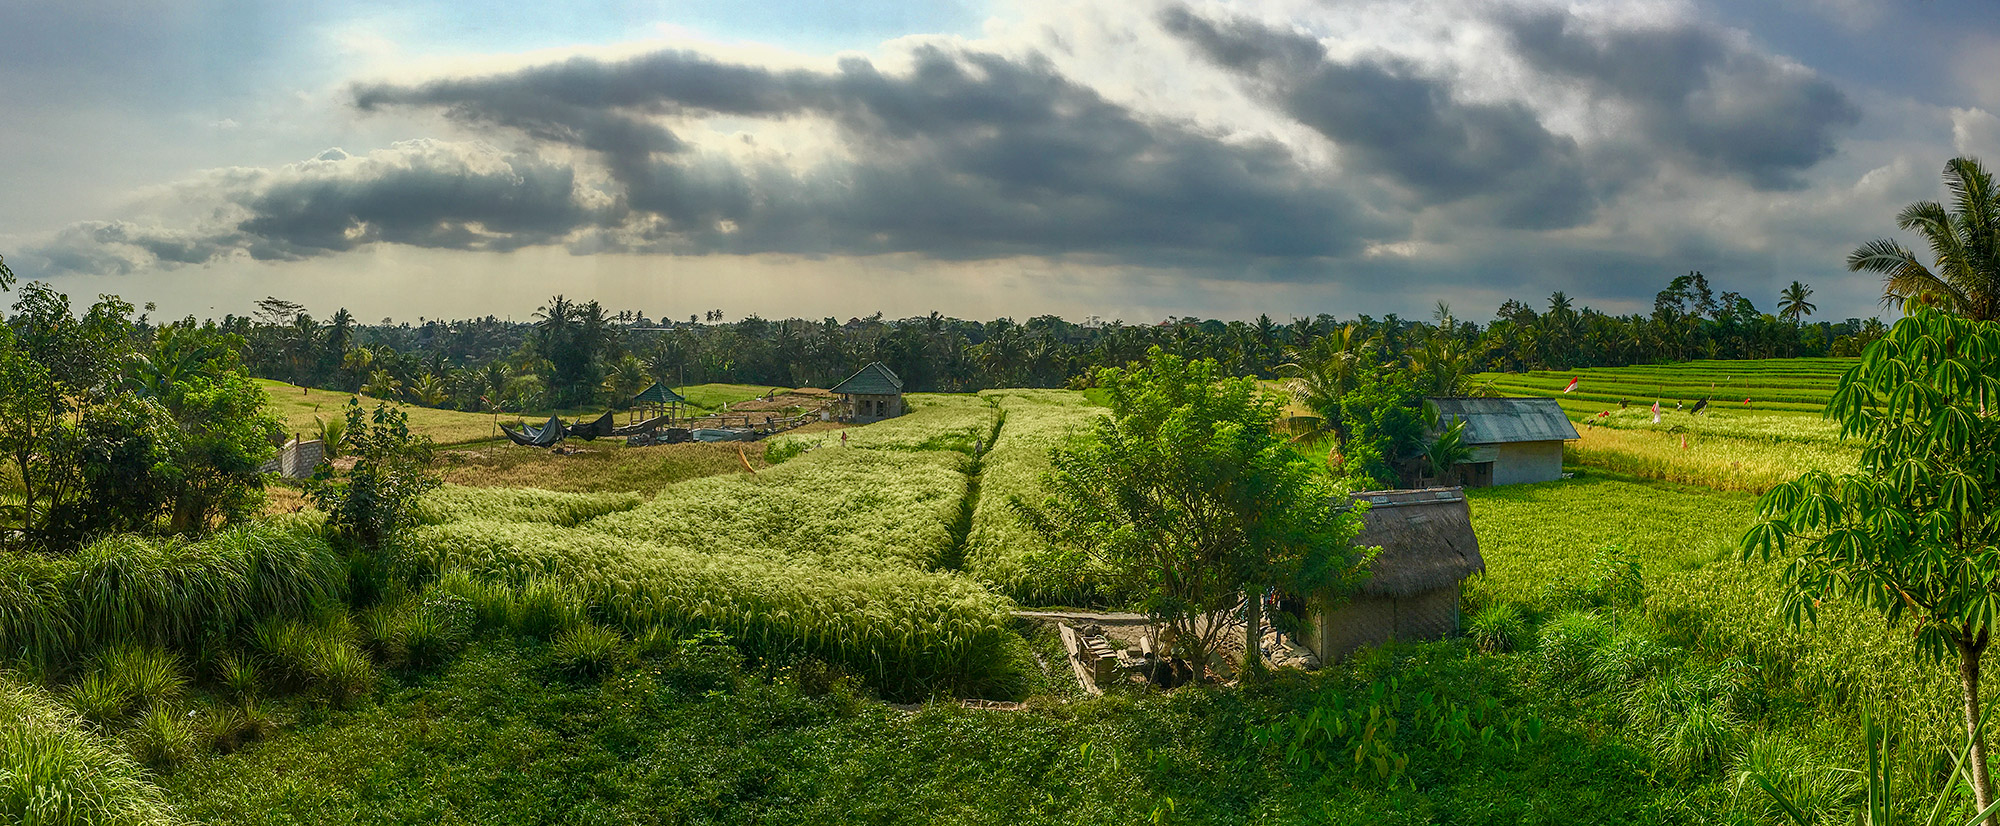 Rice fields just outside of Ubud, taken with the iPhone6s